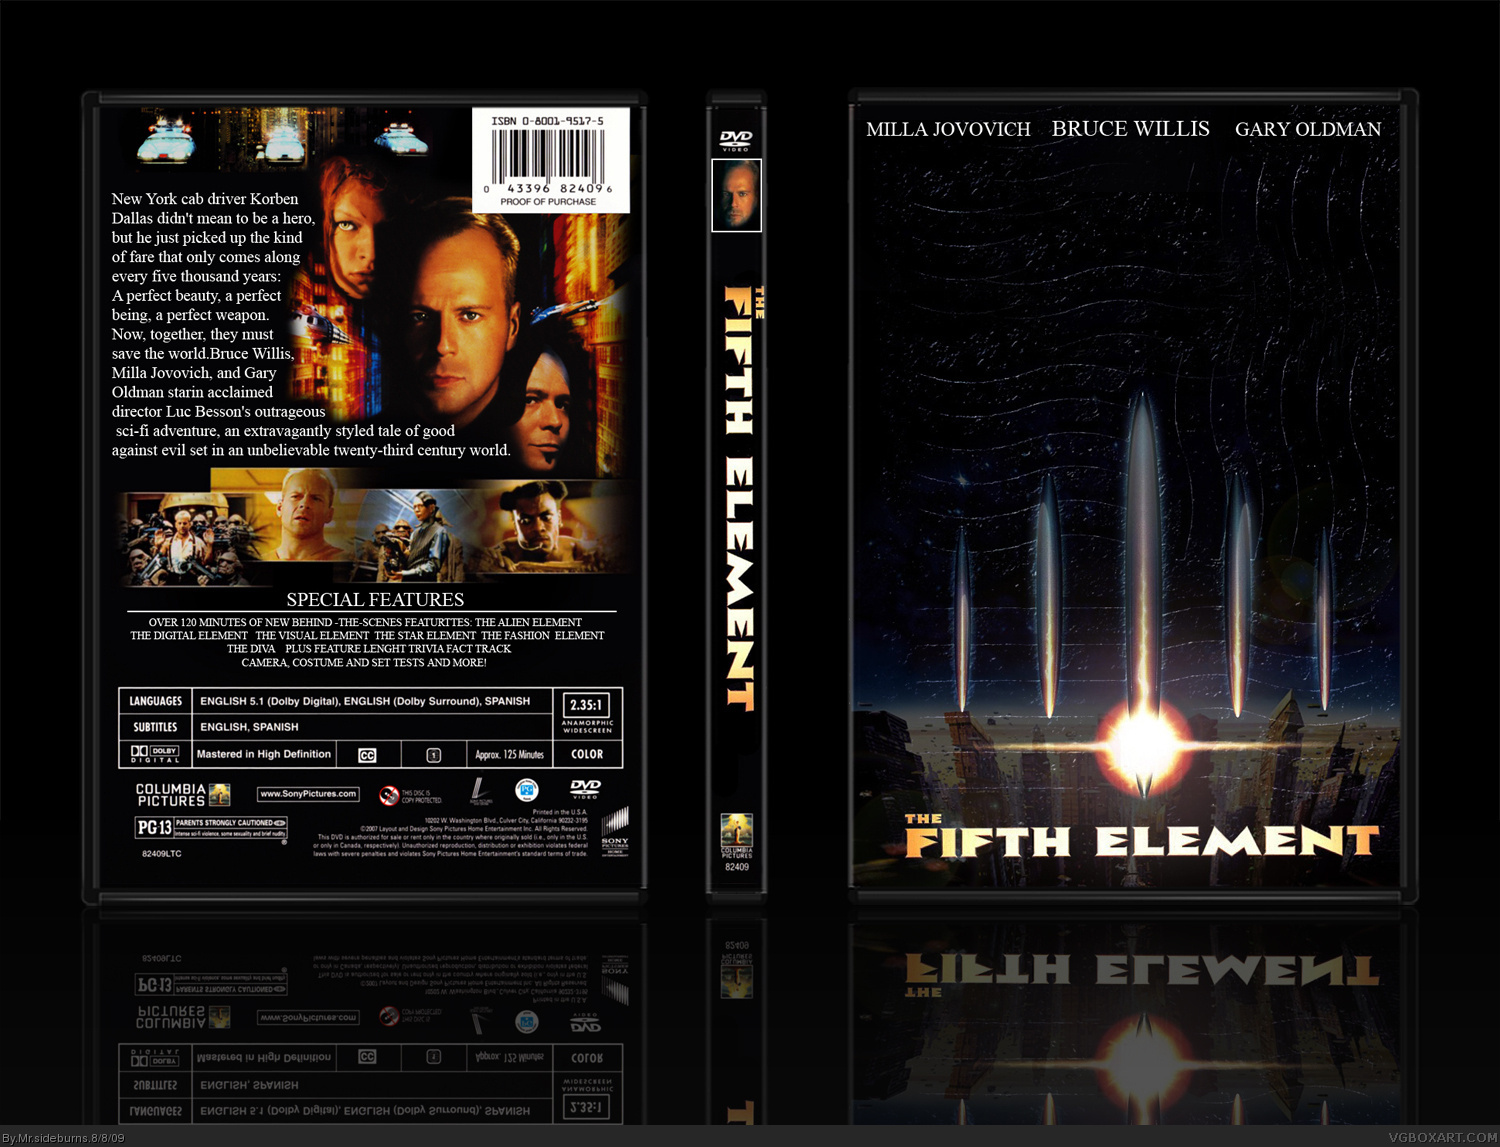 The Fifth Element box cover